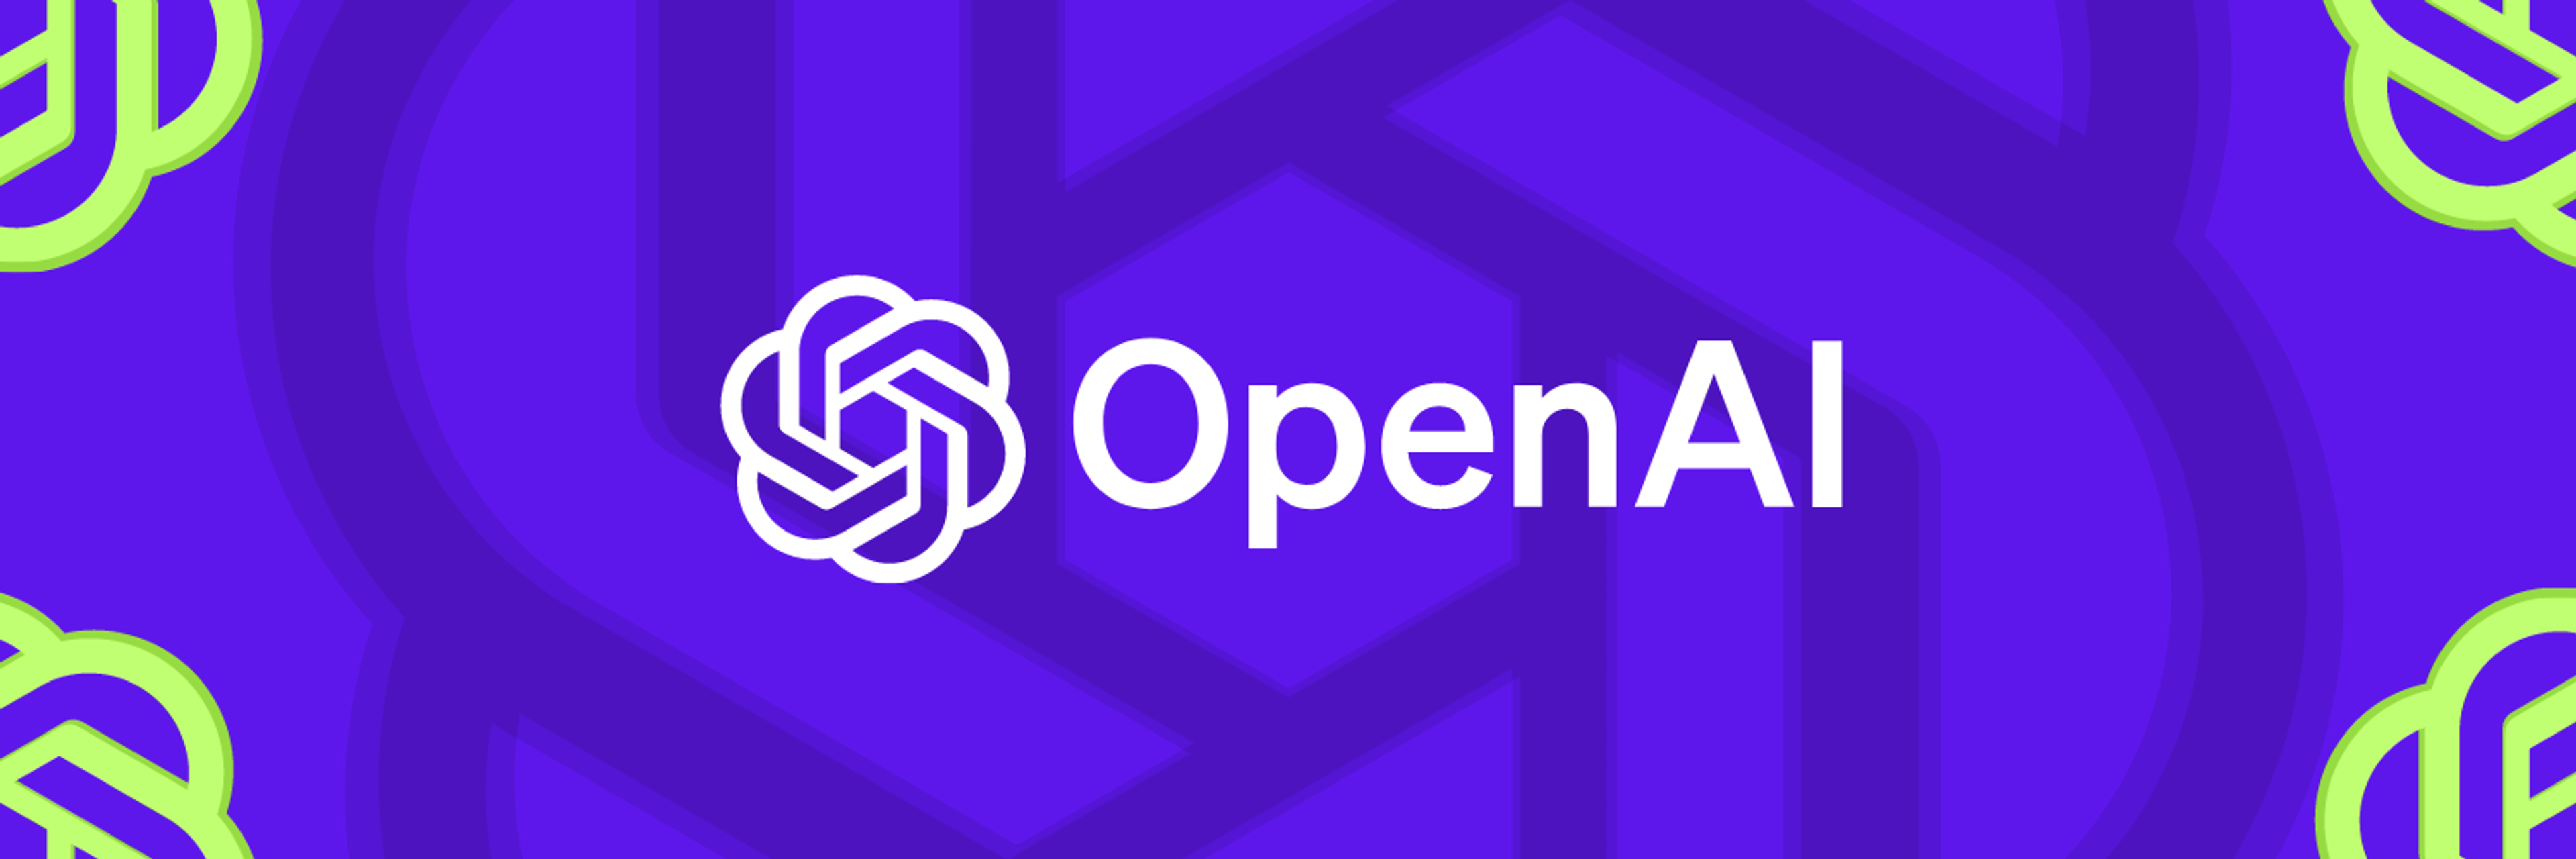 Picture is a banner image of OpenAI logo